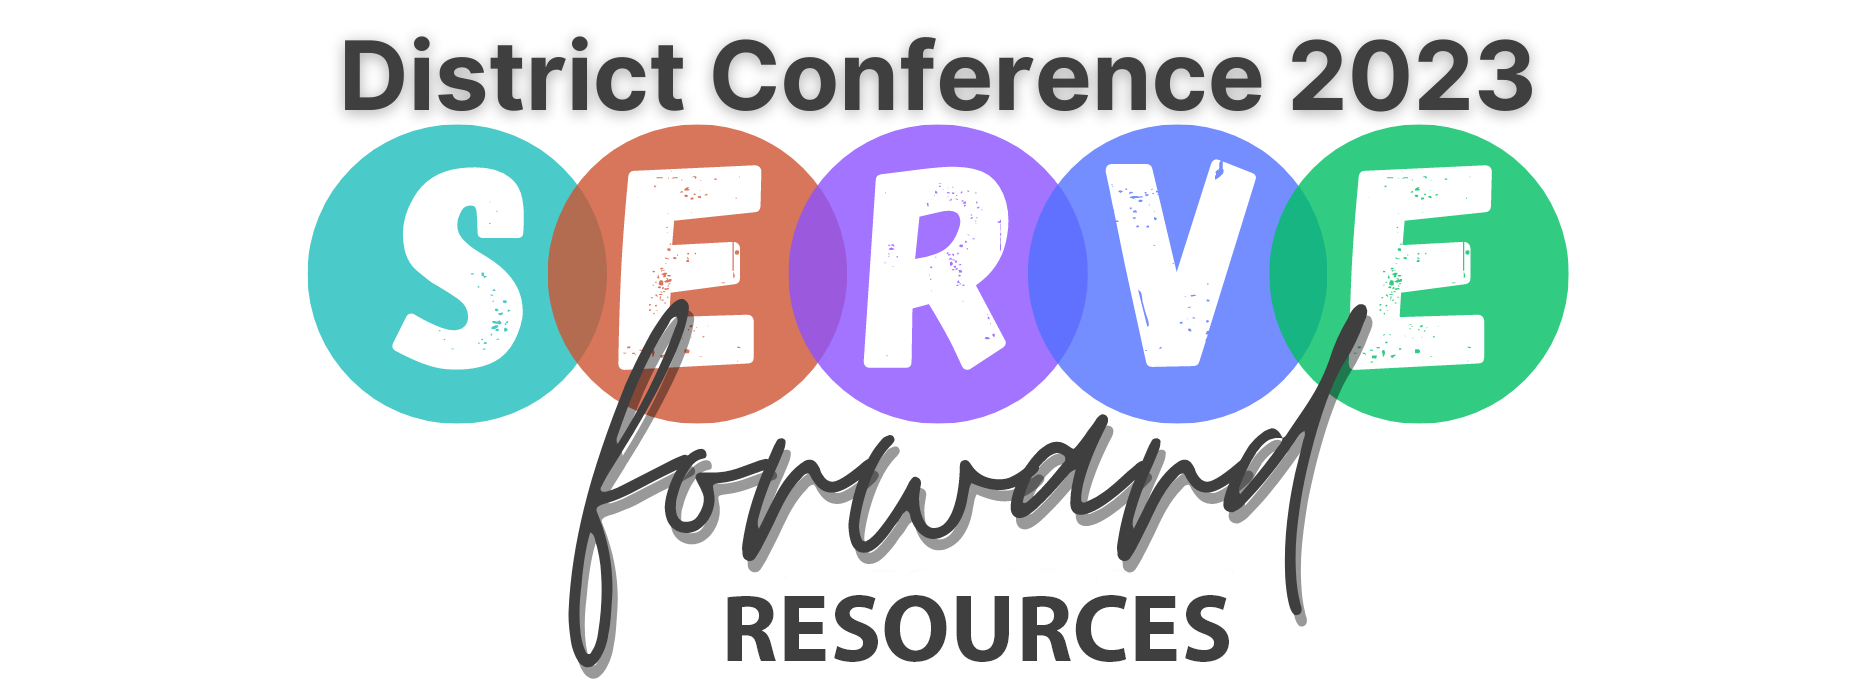 2023 District Conference Resources